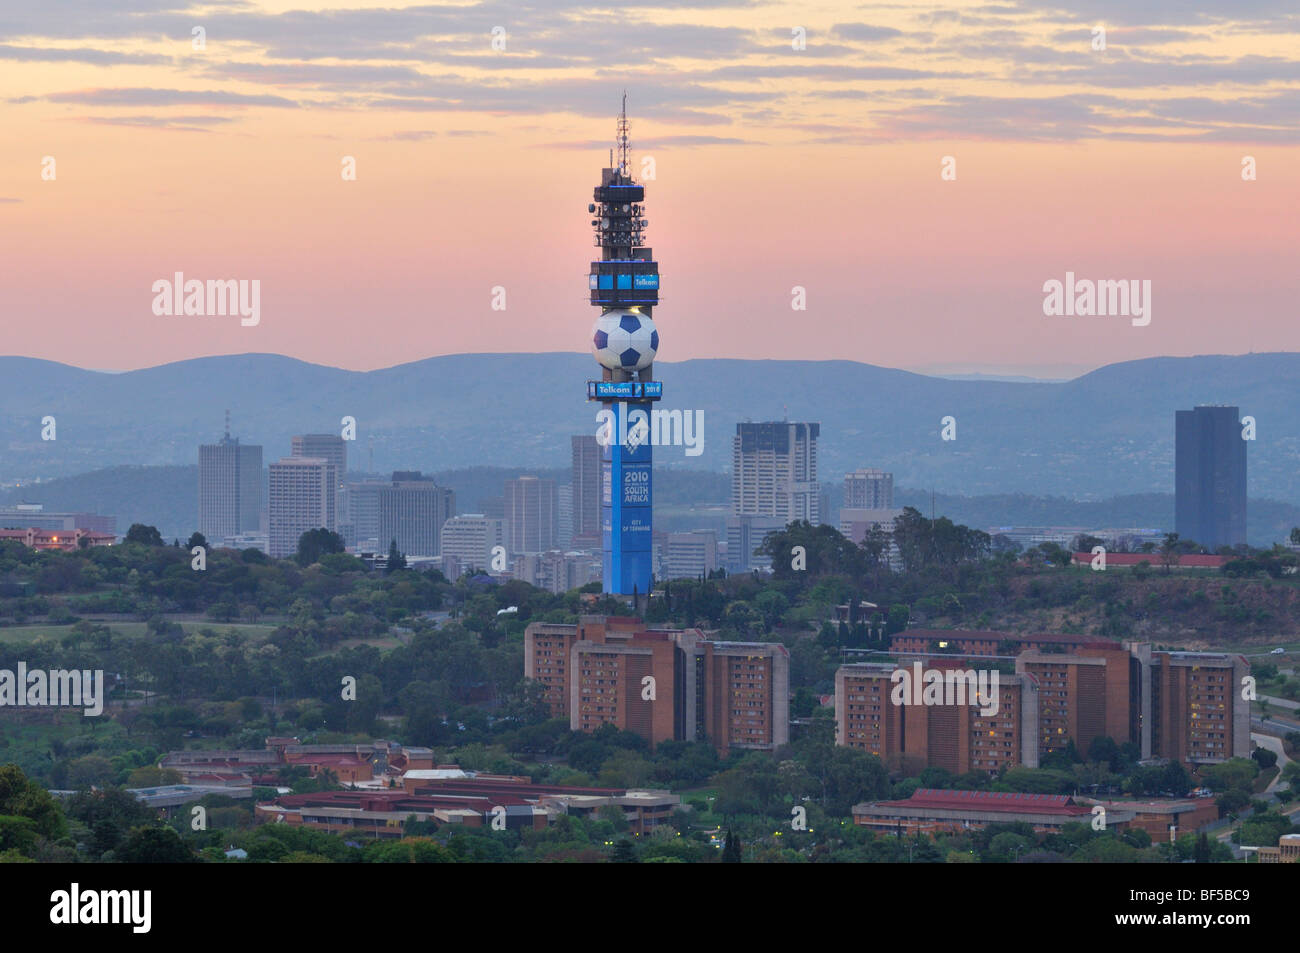 TV Tower of the South African Telecom with a football motif in Pretoria, host city of the FIFA World Cup 2010, Pretoria, South  Stock Photo